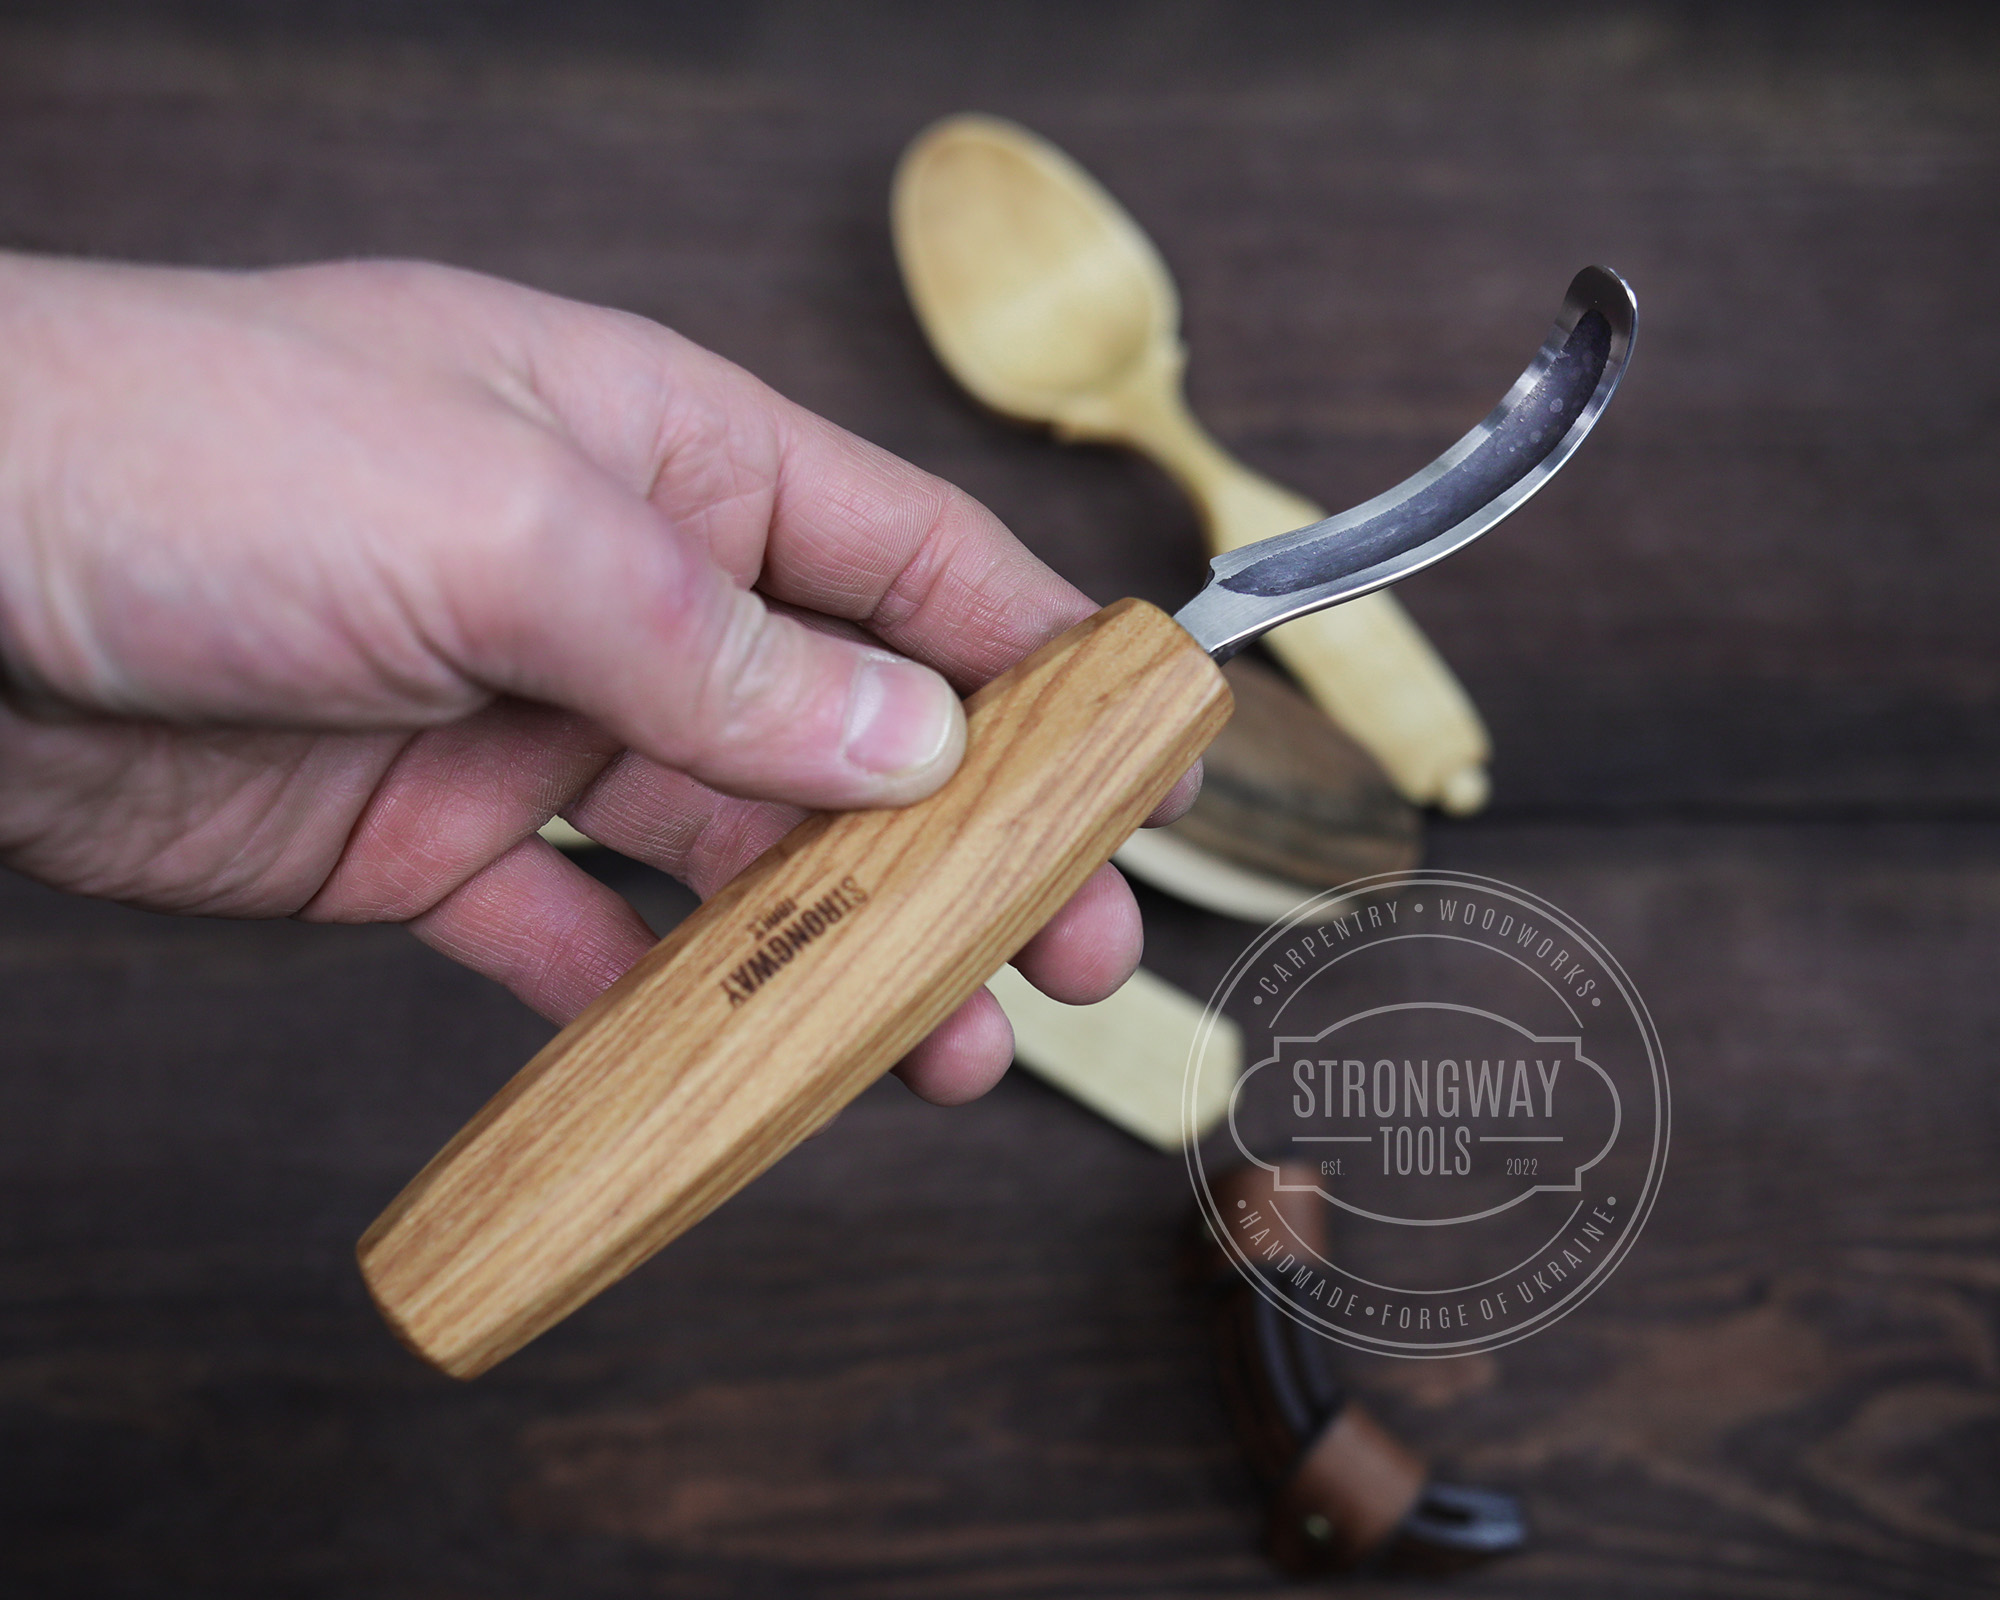 Wood Carving Hook Knife. Spoon Carving Tool for Spoons, Bowls, kuksa and  Cups carvings - Right Handed - Basic Crooked Knife for Professional Spoon